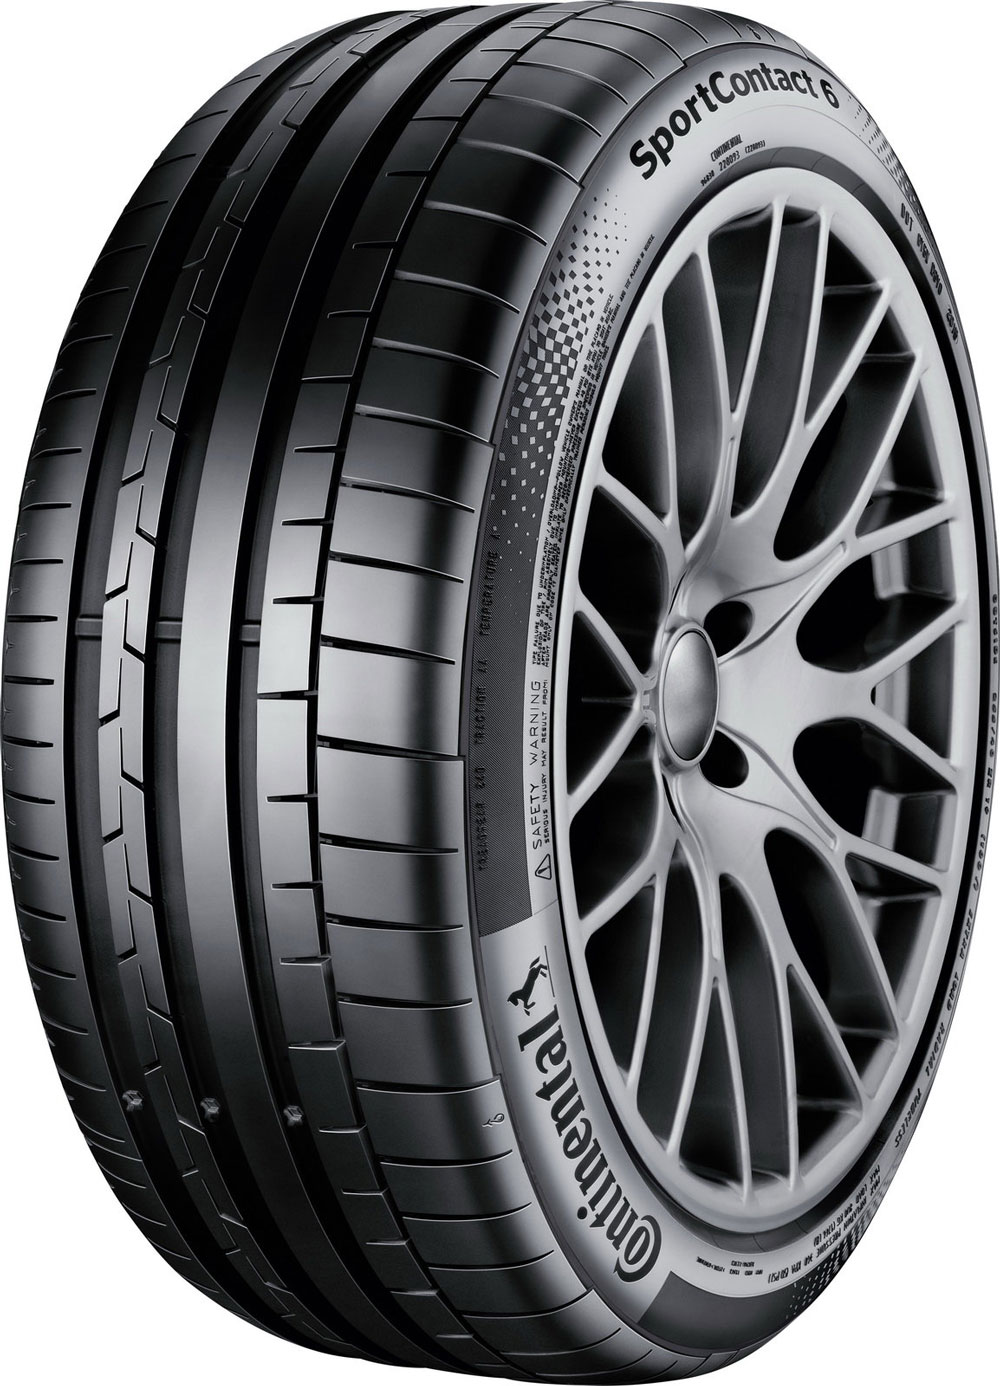 Гуми за кола CONTINENTAL SPORT CONTACT 6 XL 265/35 R22 102Y